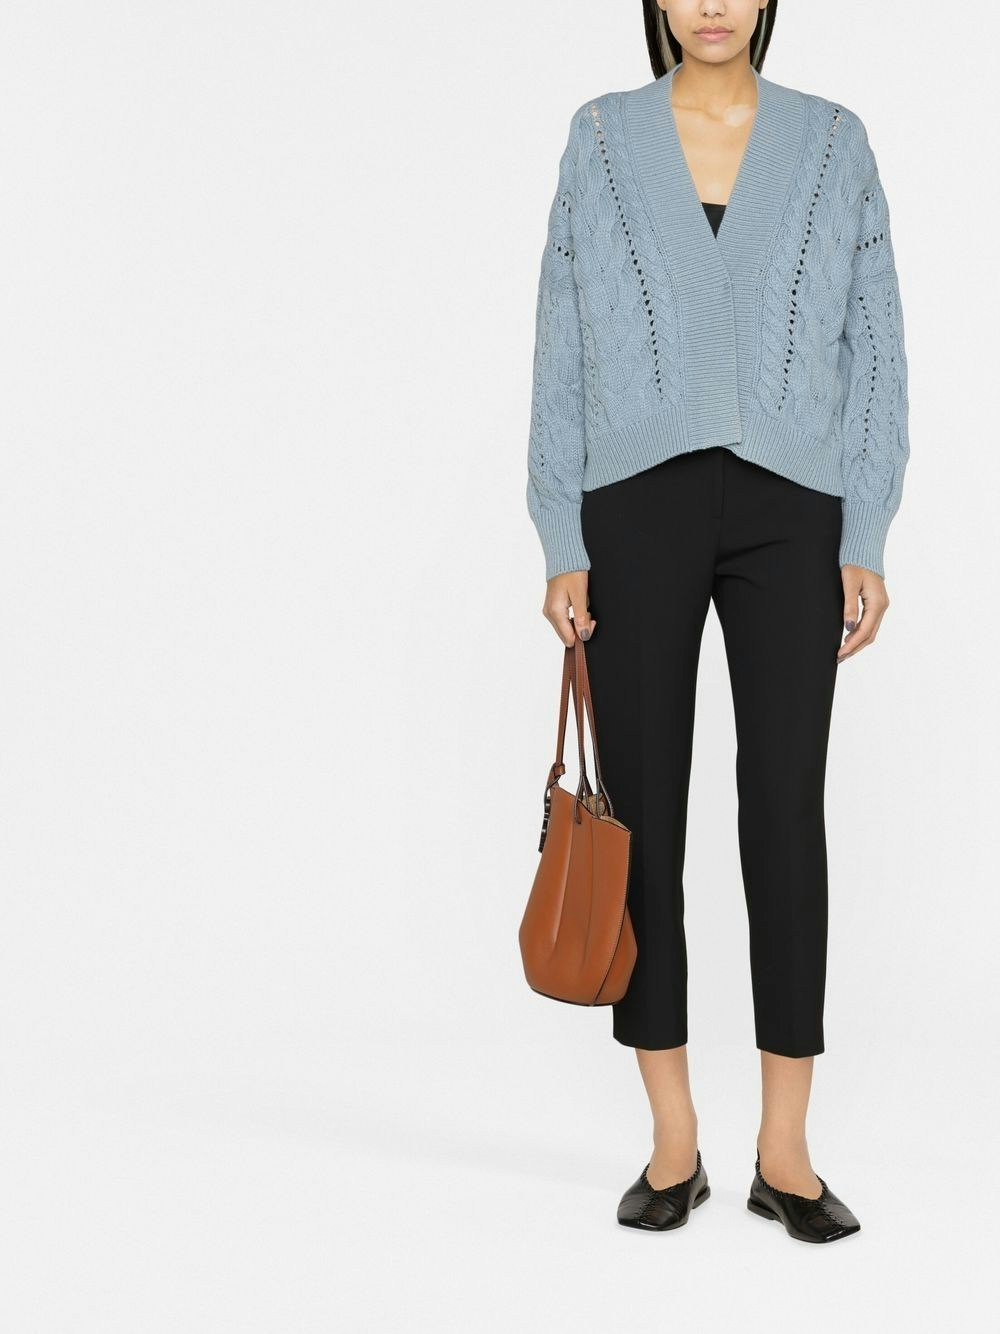 C9555 BRUNELLO CUCINELLI cable-knit long-sleeved cardigan